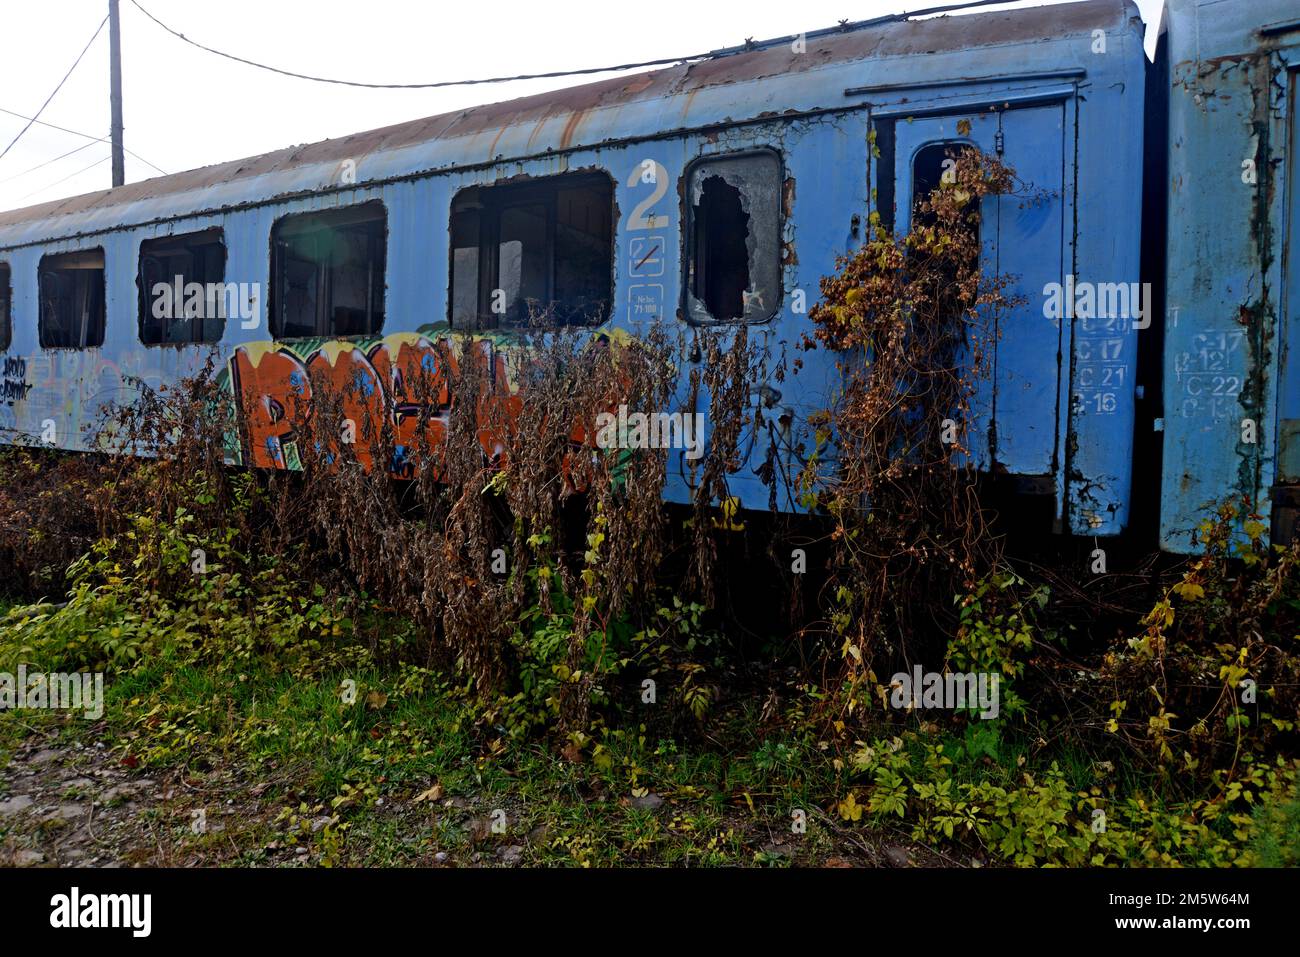 Redundandt and disused railway carriages vandalised and covered in graffiti, Bucharest, Romania Stock Photo